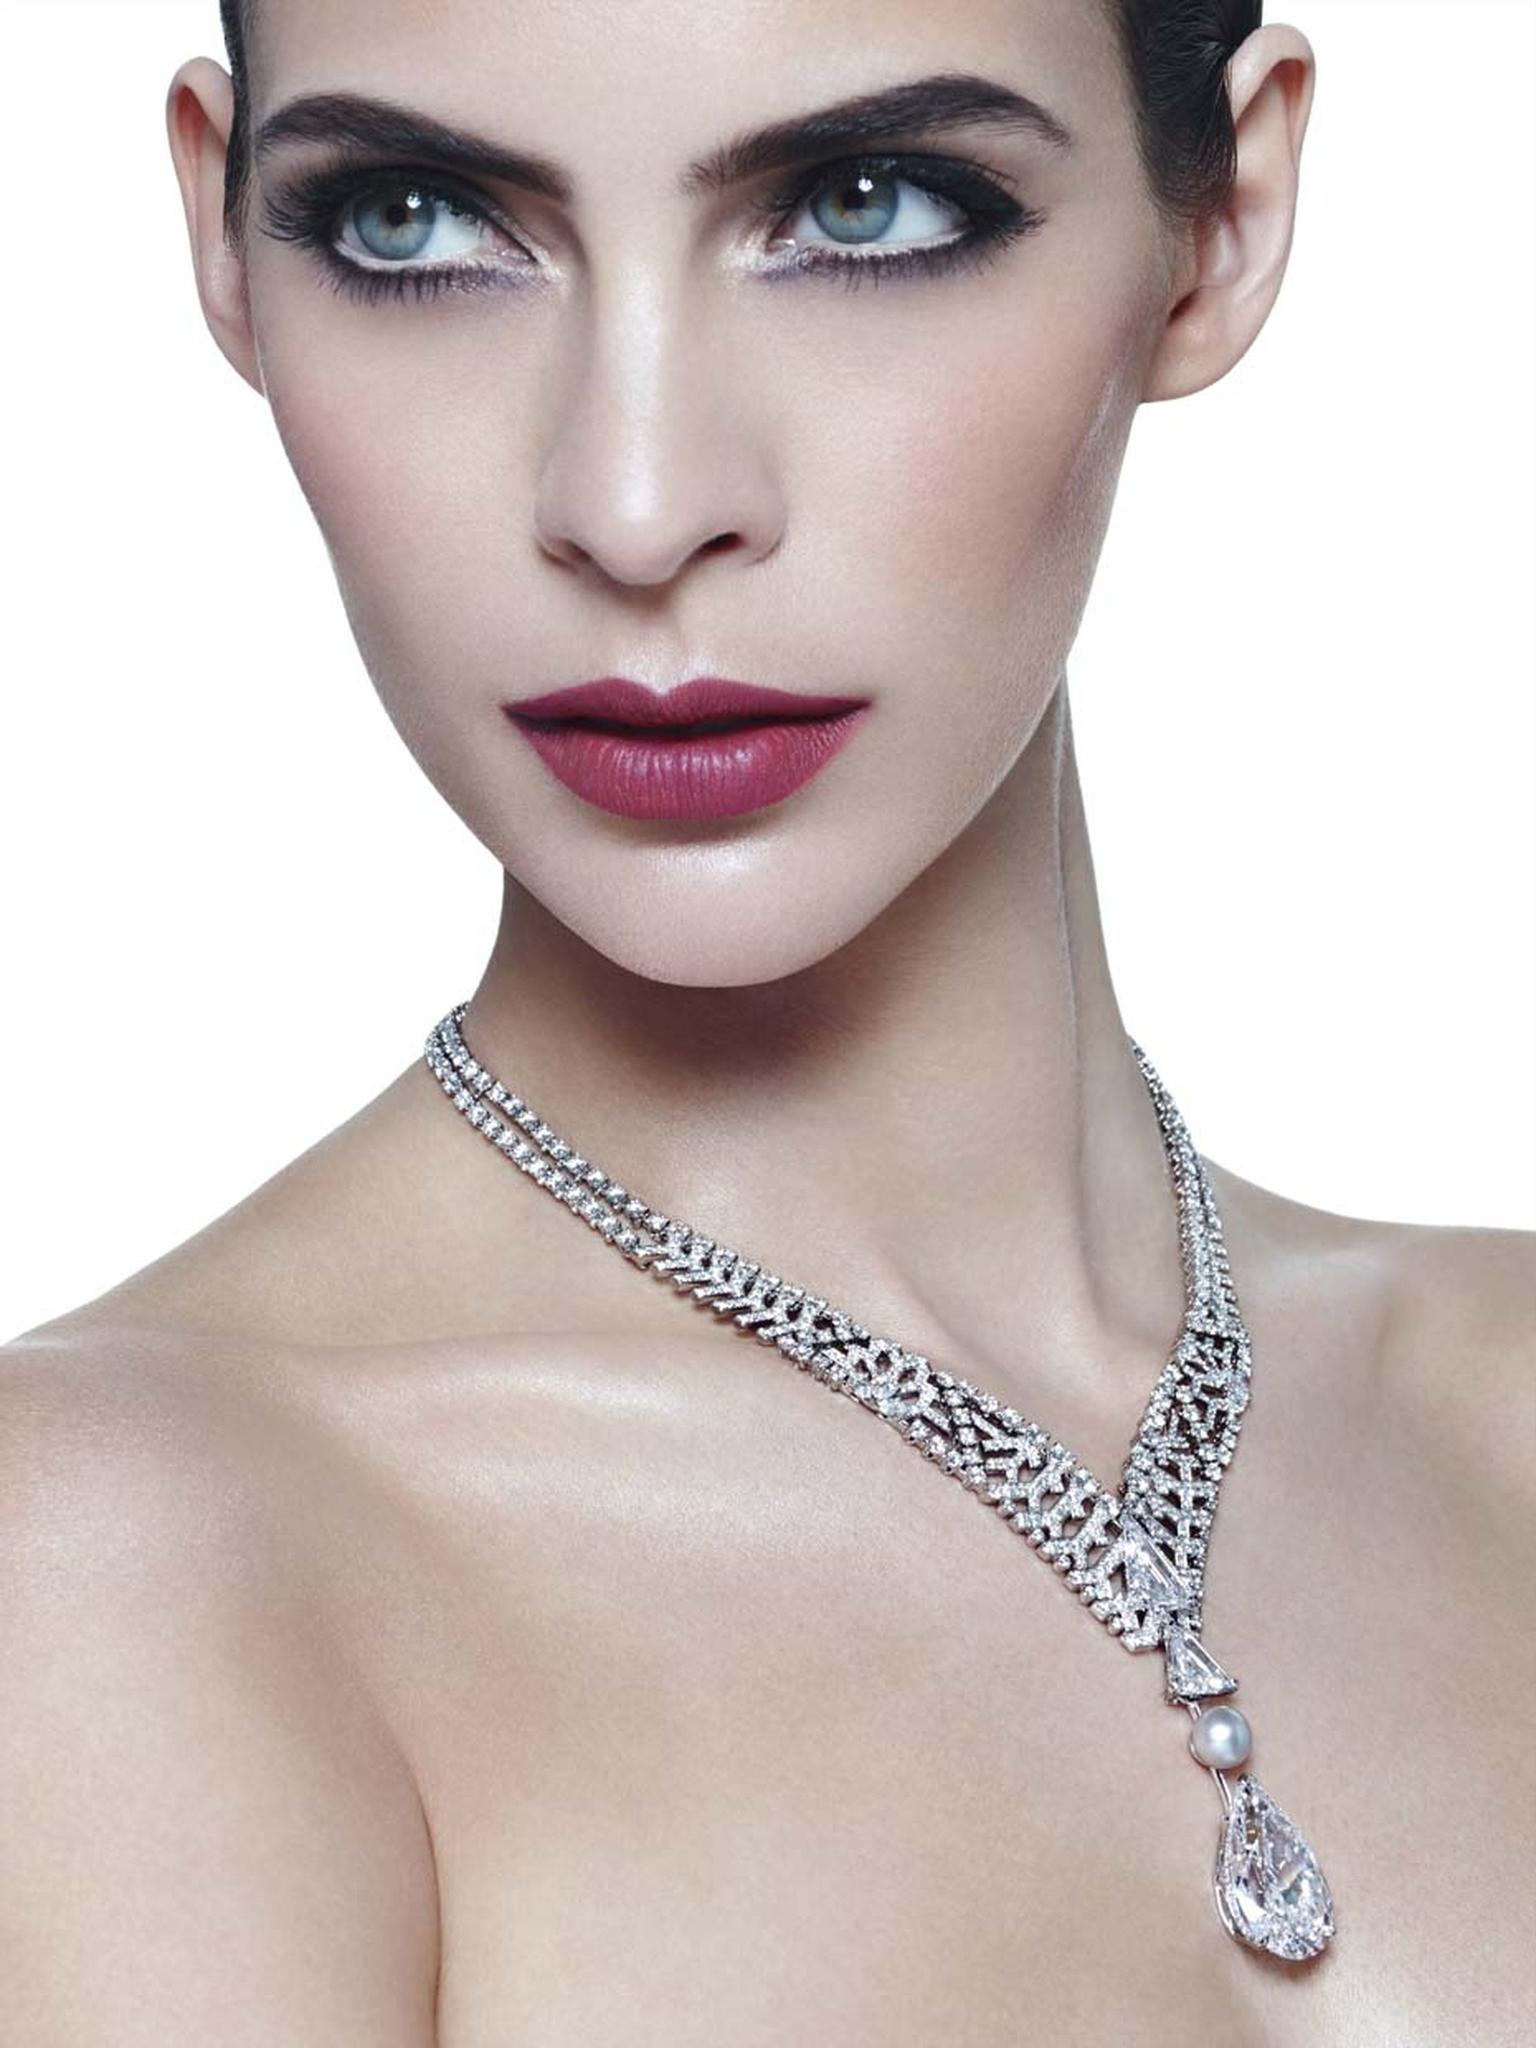 Cartier's Royal collection necklace not only features a flawless diamond but is also adorned with an openwork lattice of diamonds on the necklace which moves down the neck in a V-shape arrangement to converge in a 5.12ct kite-shaped diamond. Beyond the la